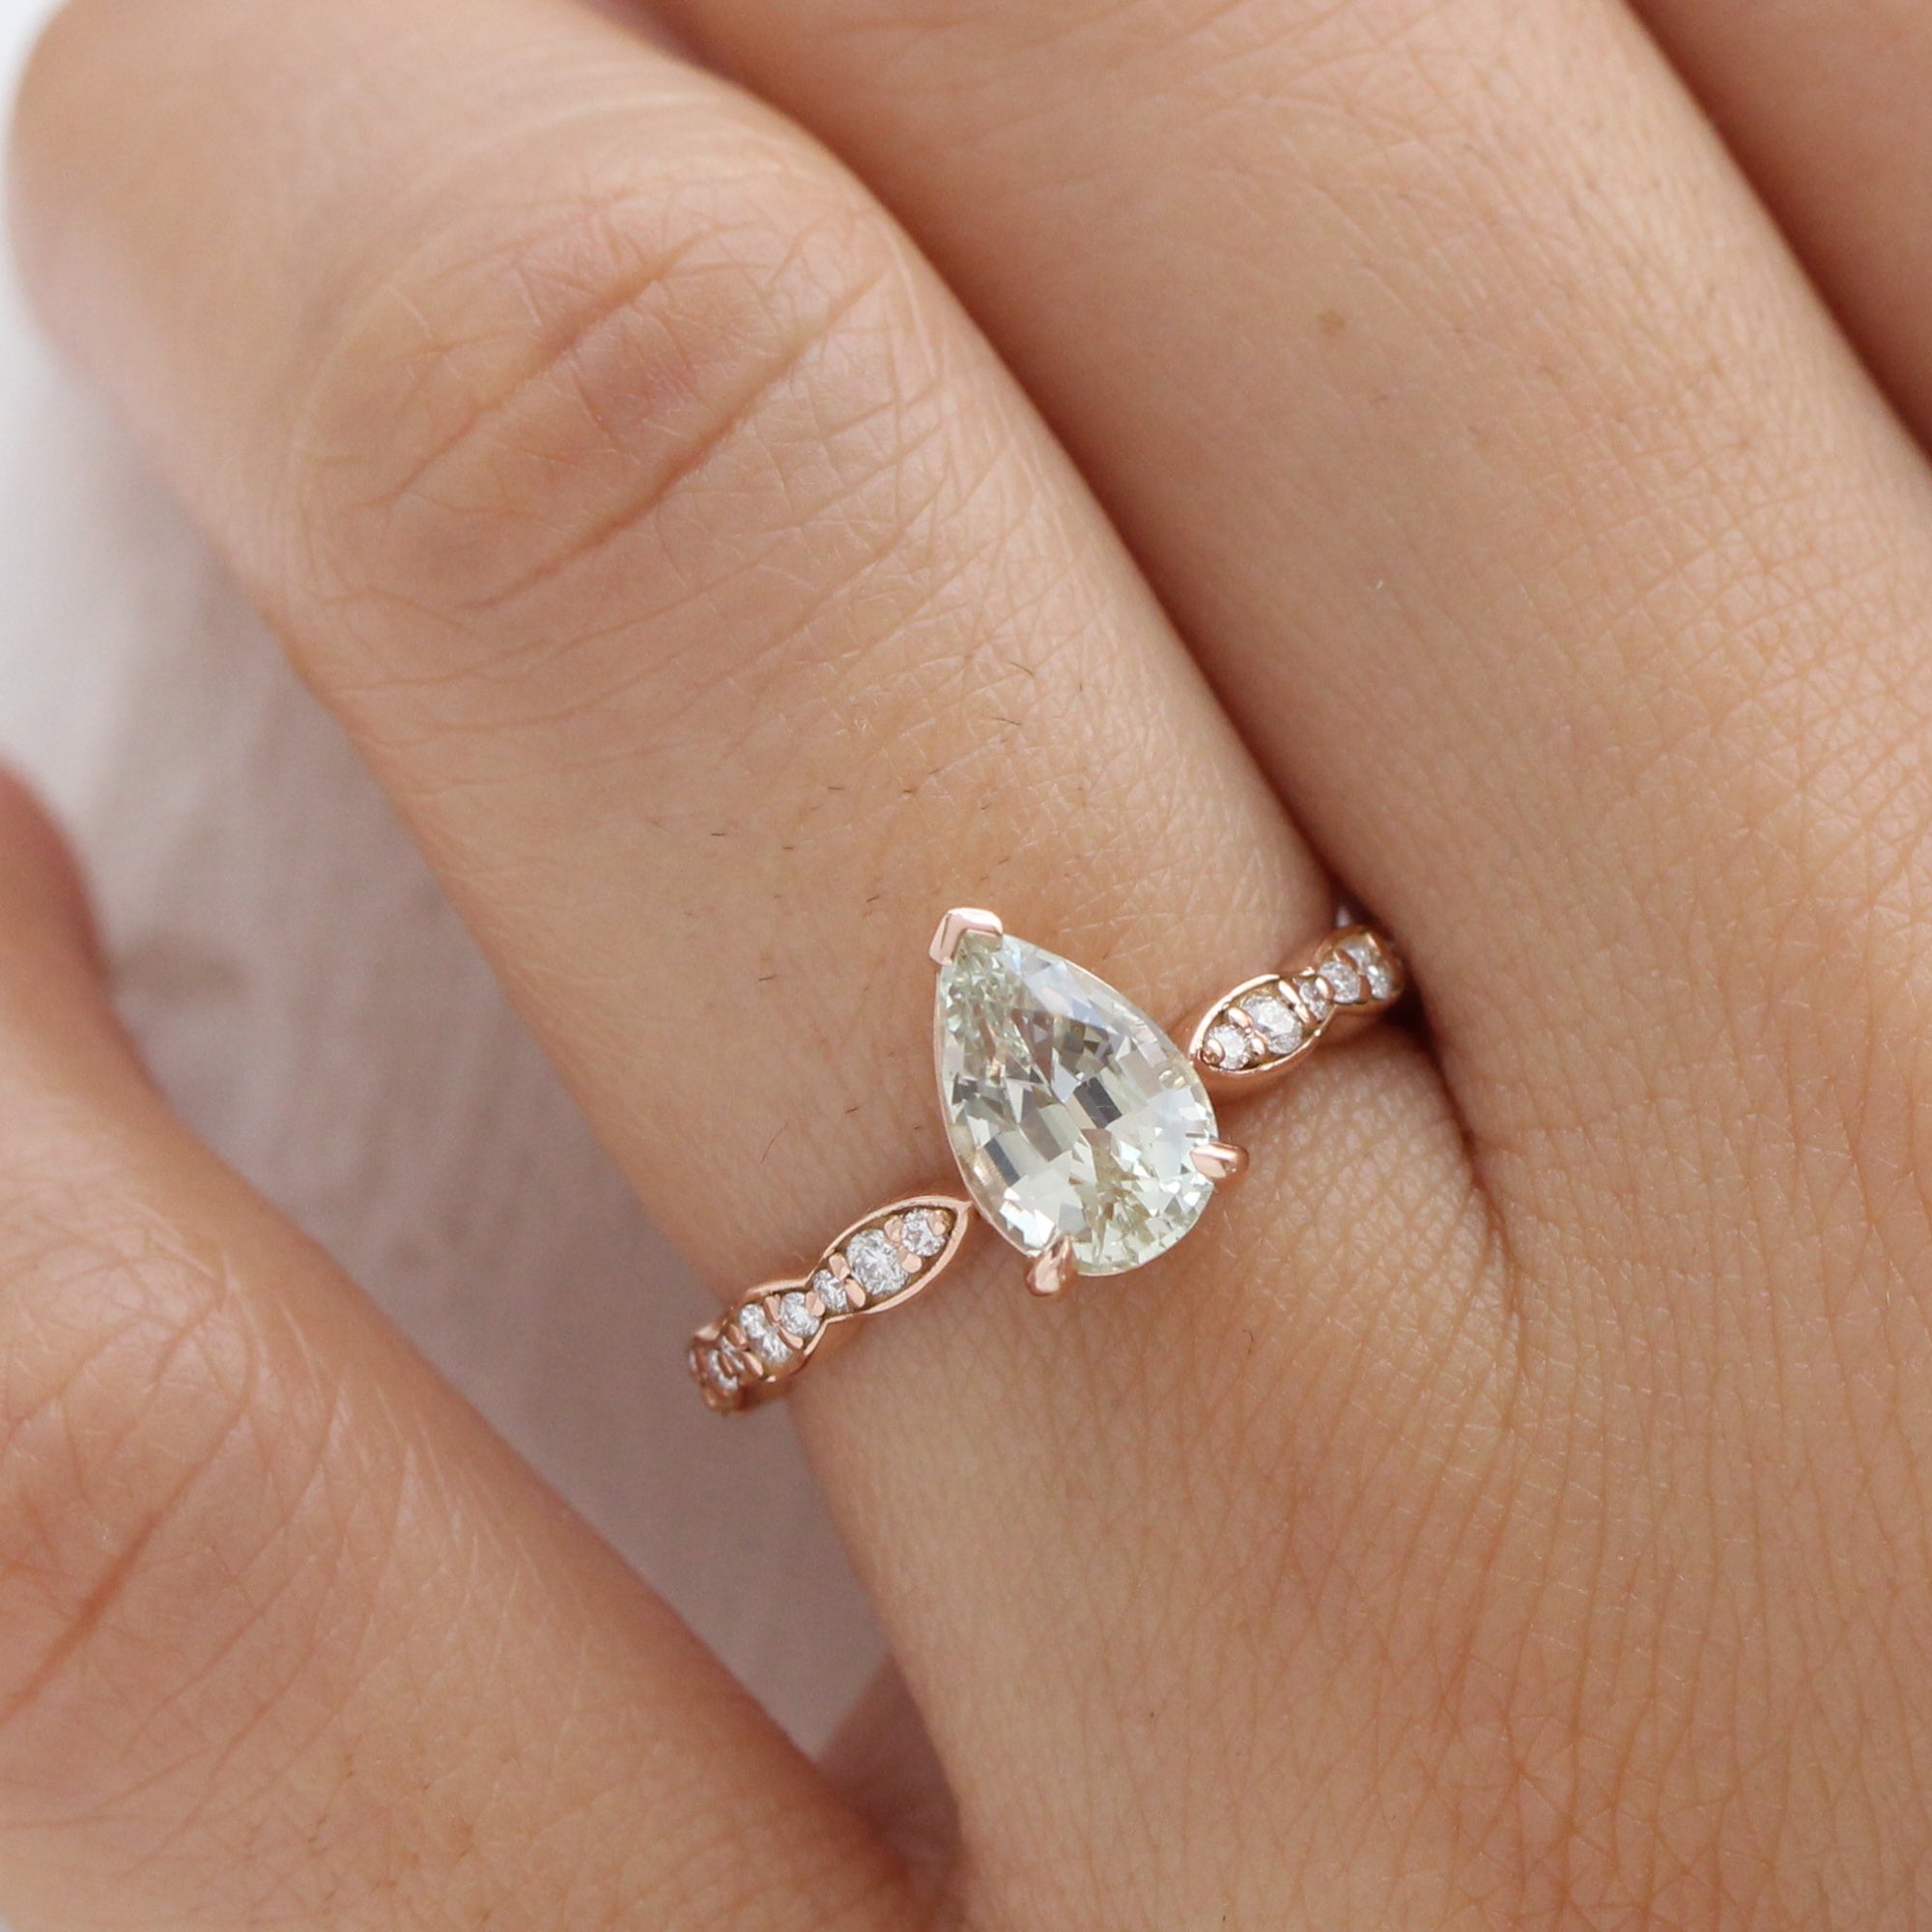 Pear seafoam green sapphire ring rose gold diamond band low set engagement ring la more design jewelry